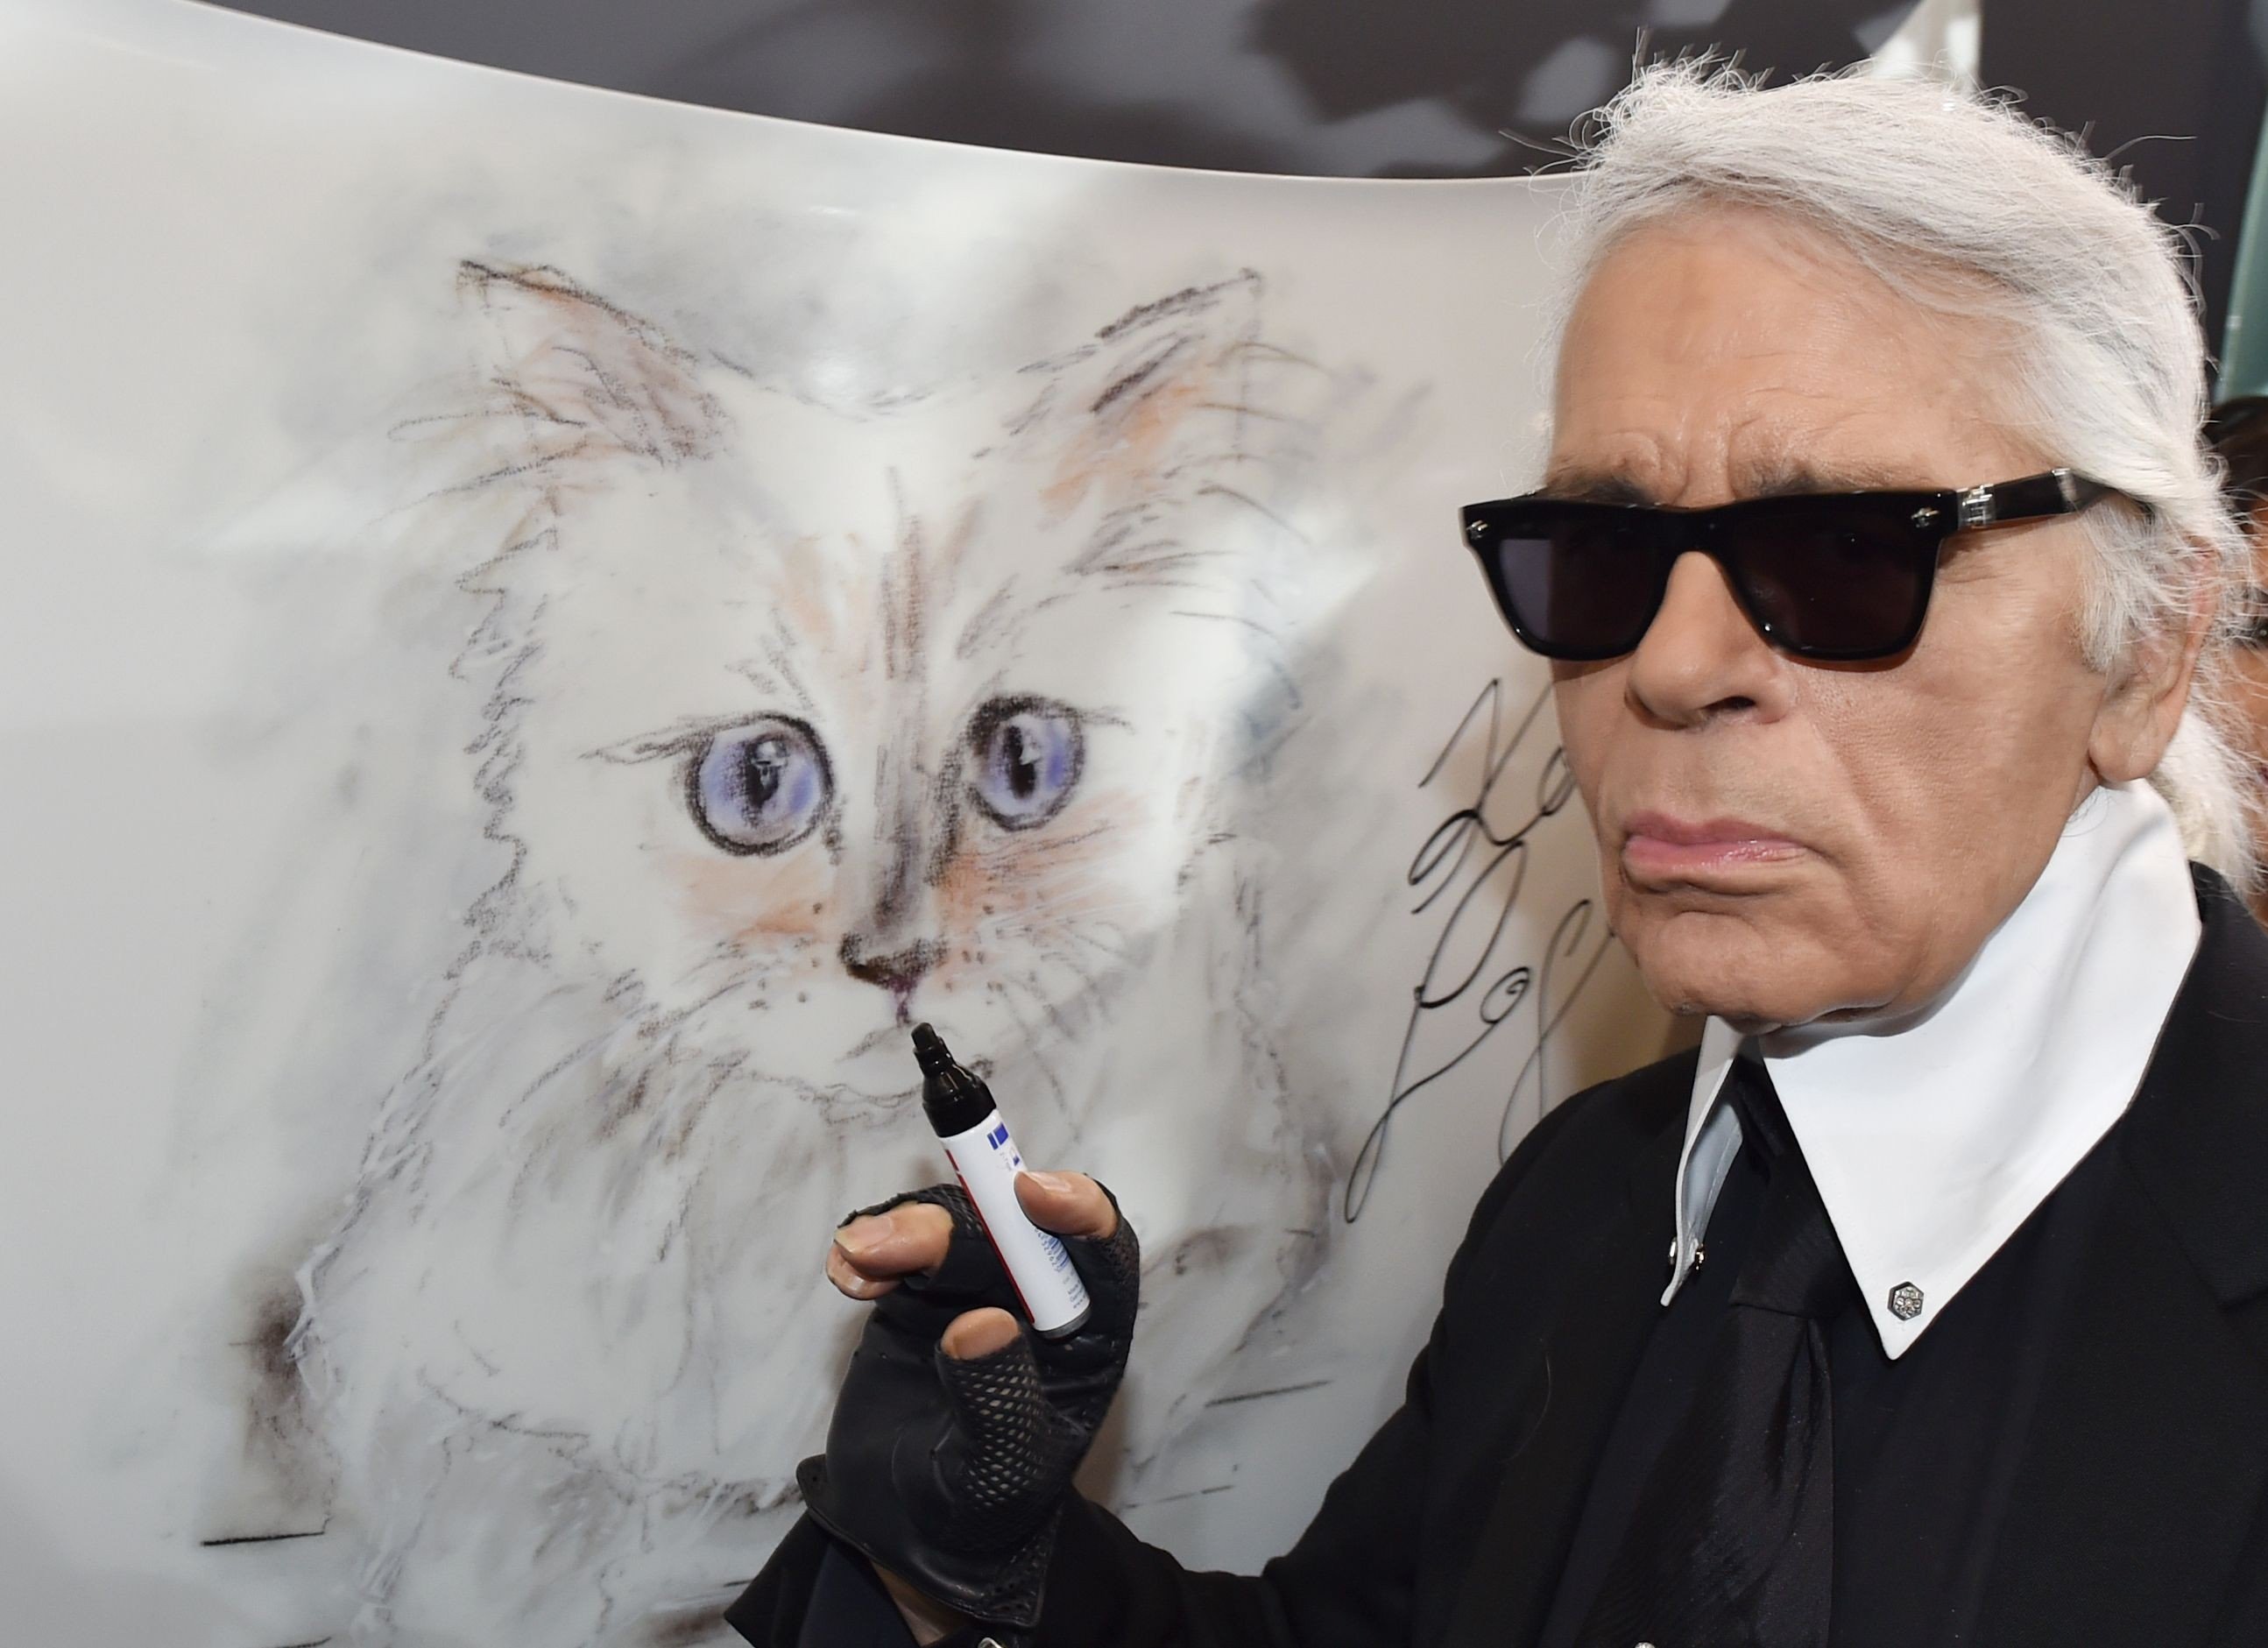 German fashion designer, artist and photographer Karl Lagerfeld poses with a painting of his cat Choupette during the inauguration of the show Corsa Karl and Choupette in Berlin in 2015. Photo: DPA/AFP